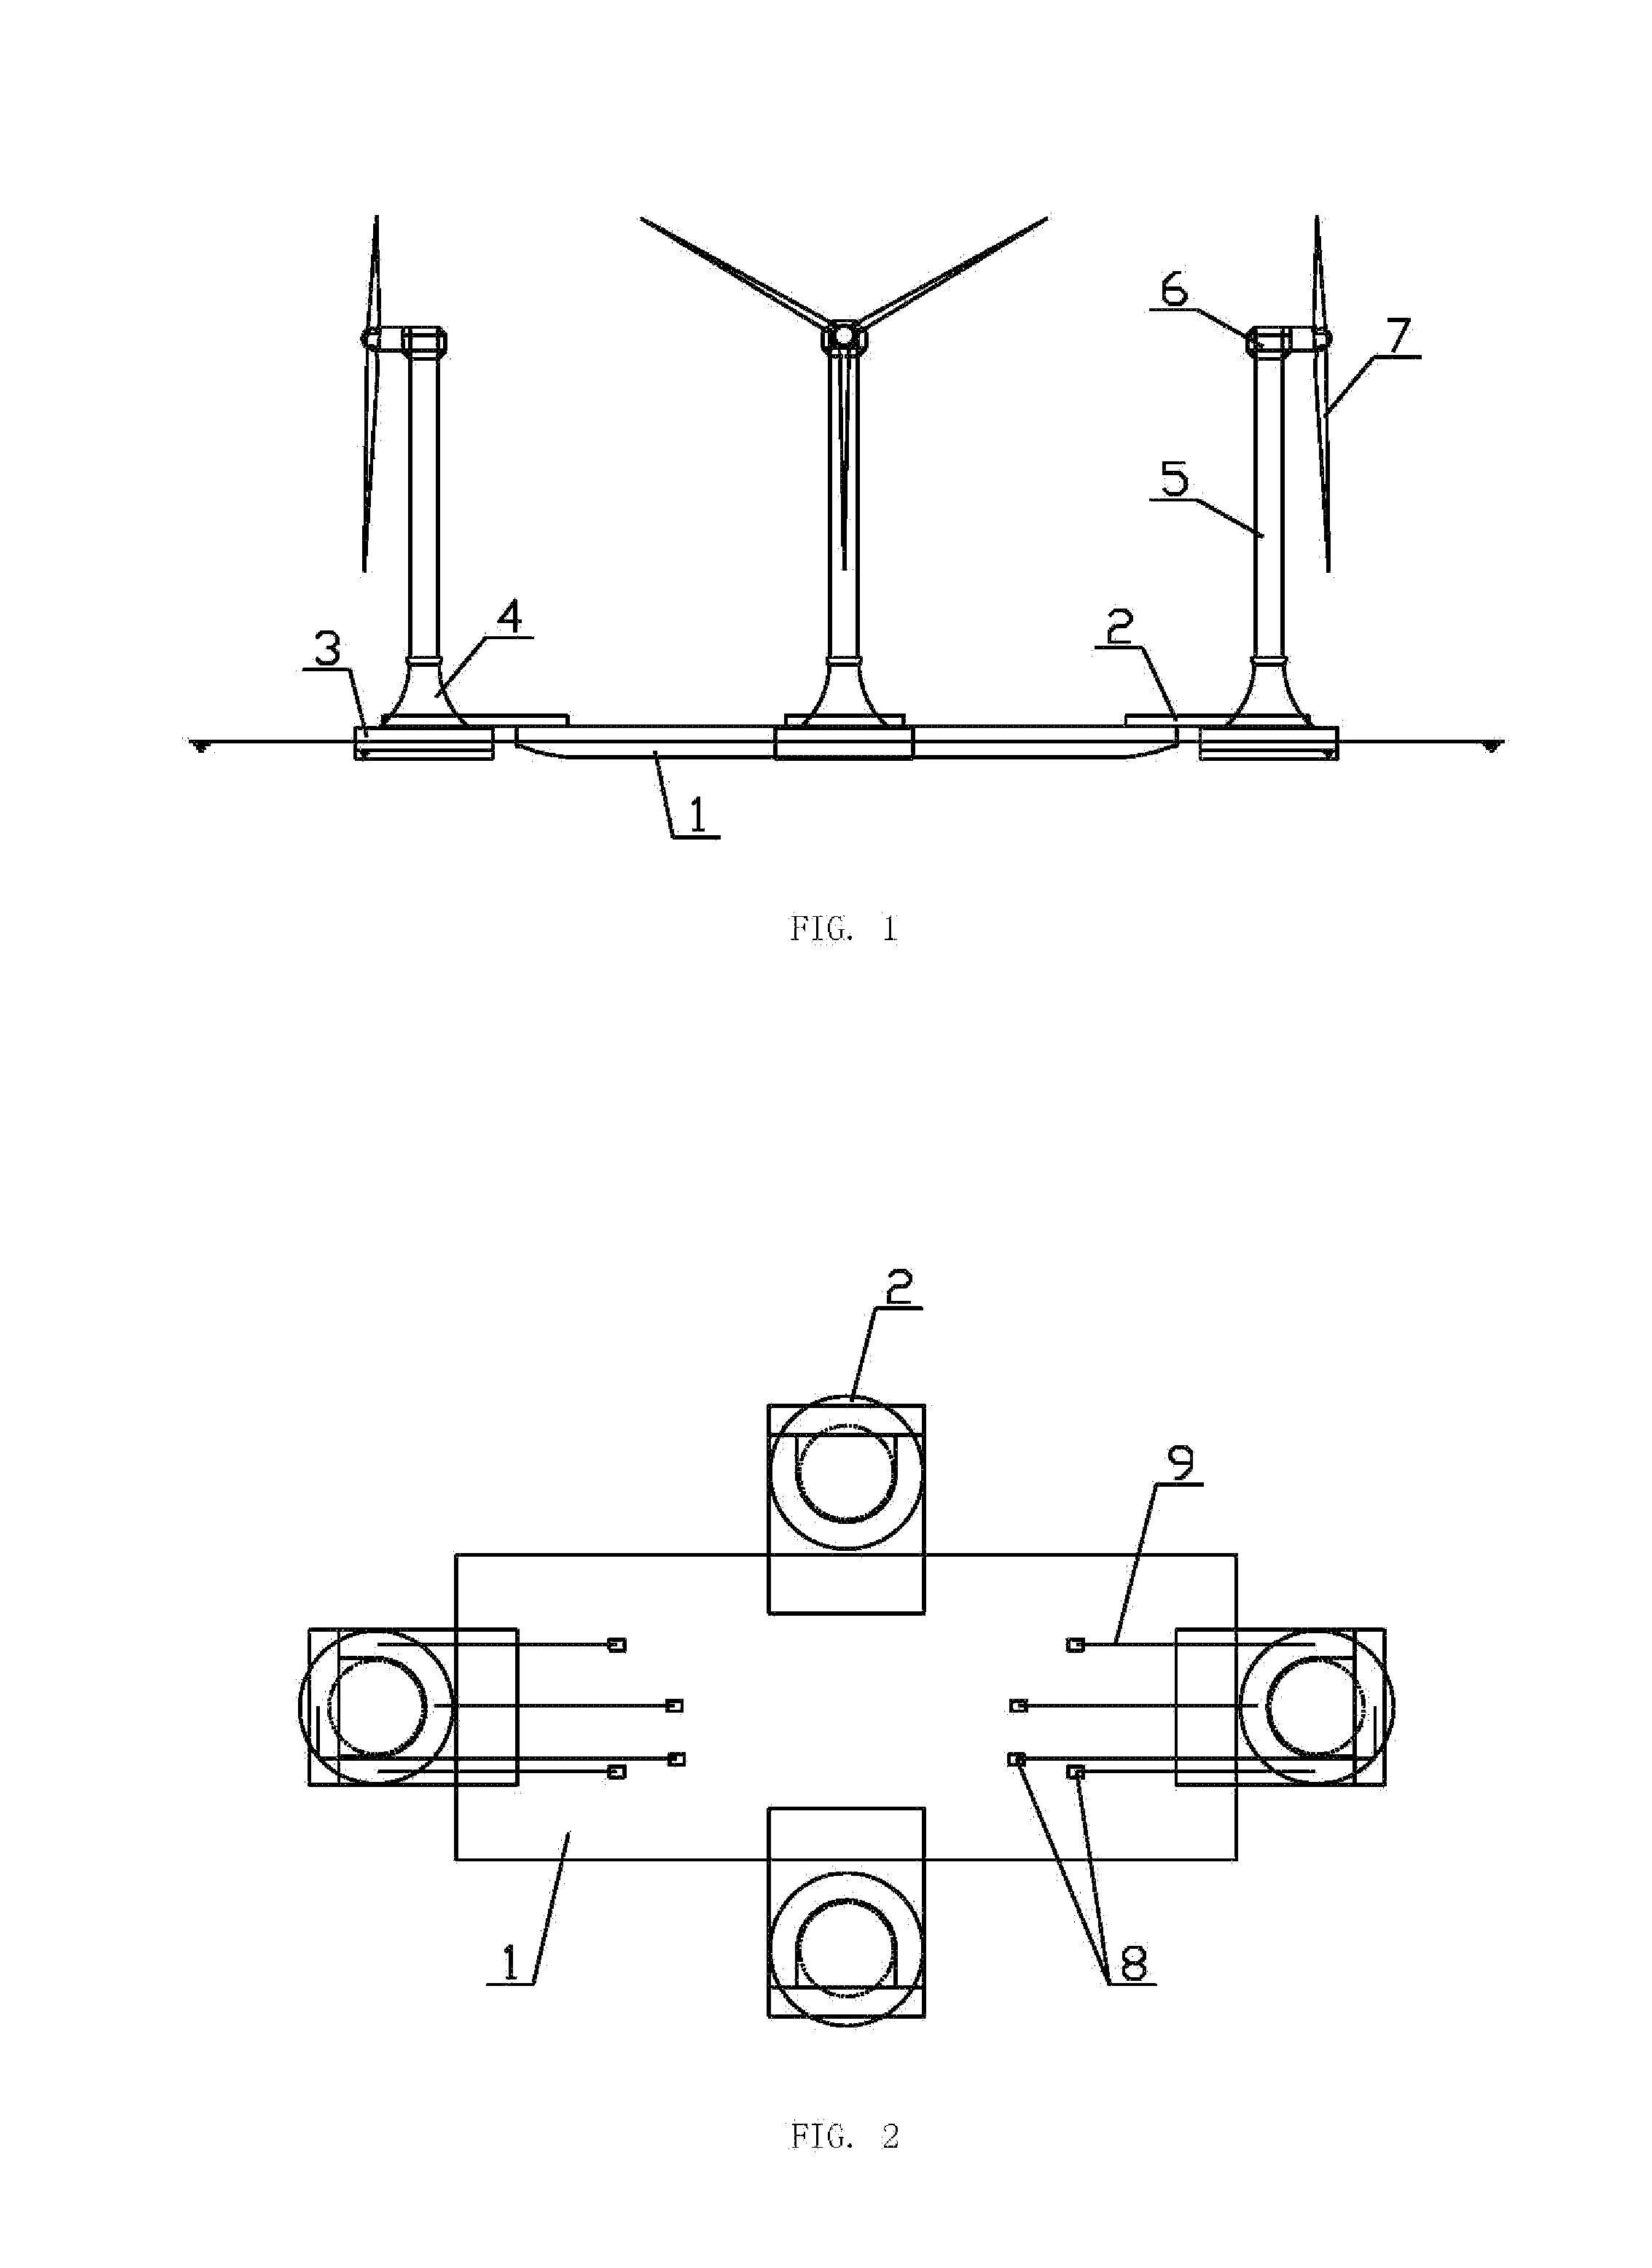 Method for transporting an offshore wind turbine in a floating manner